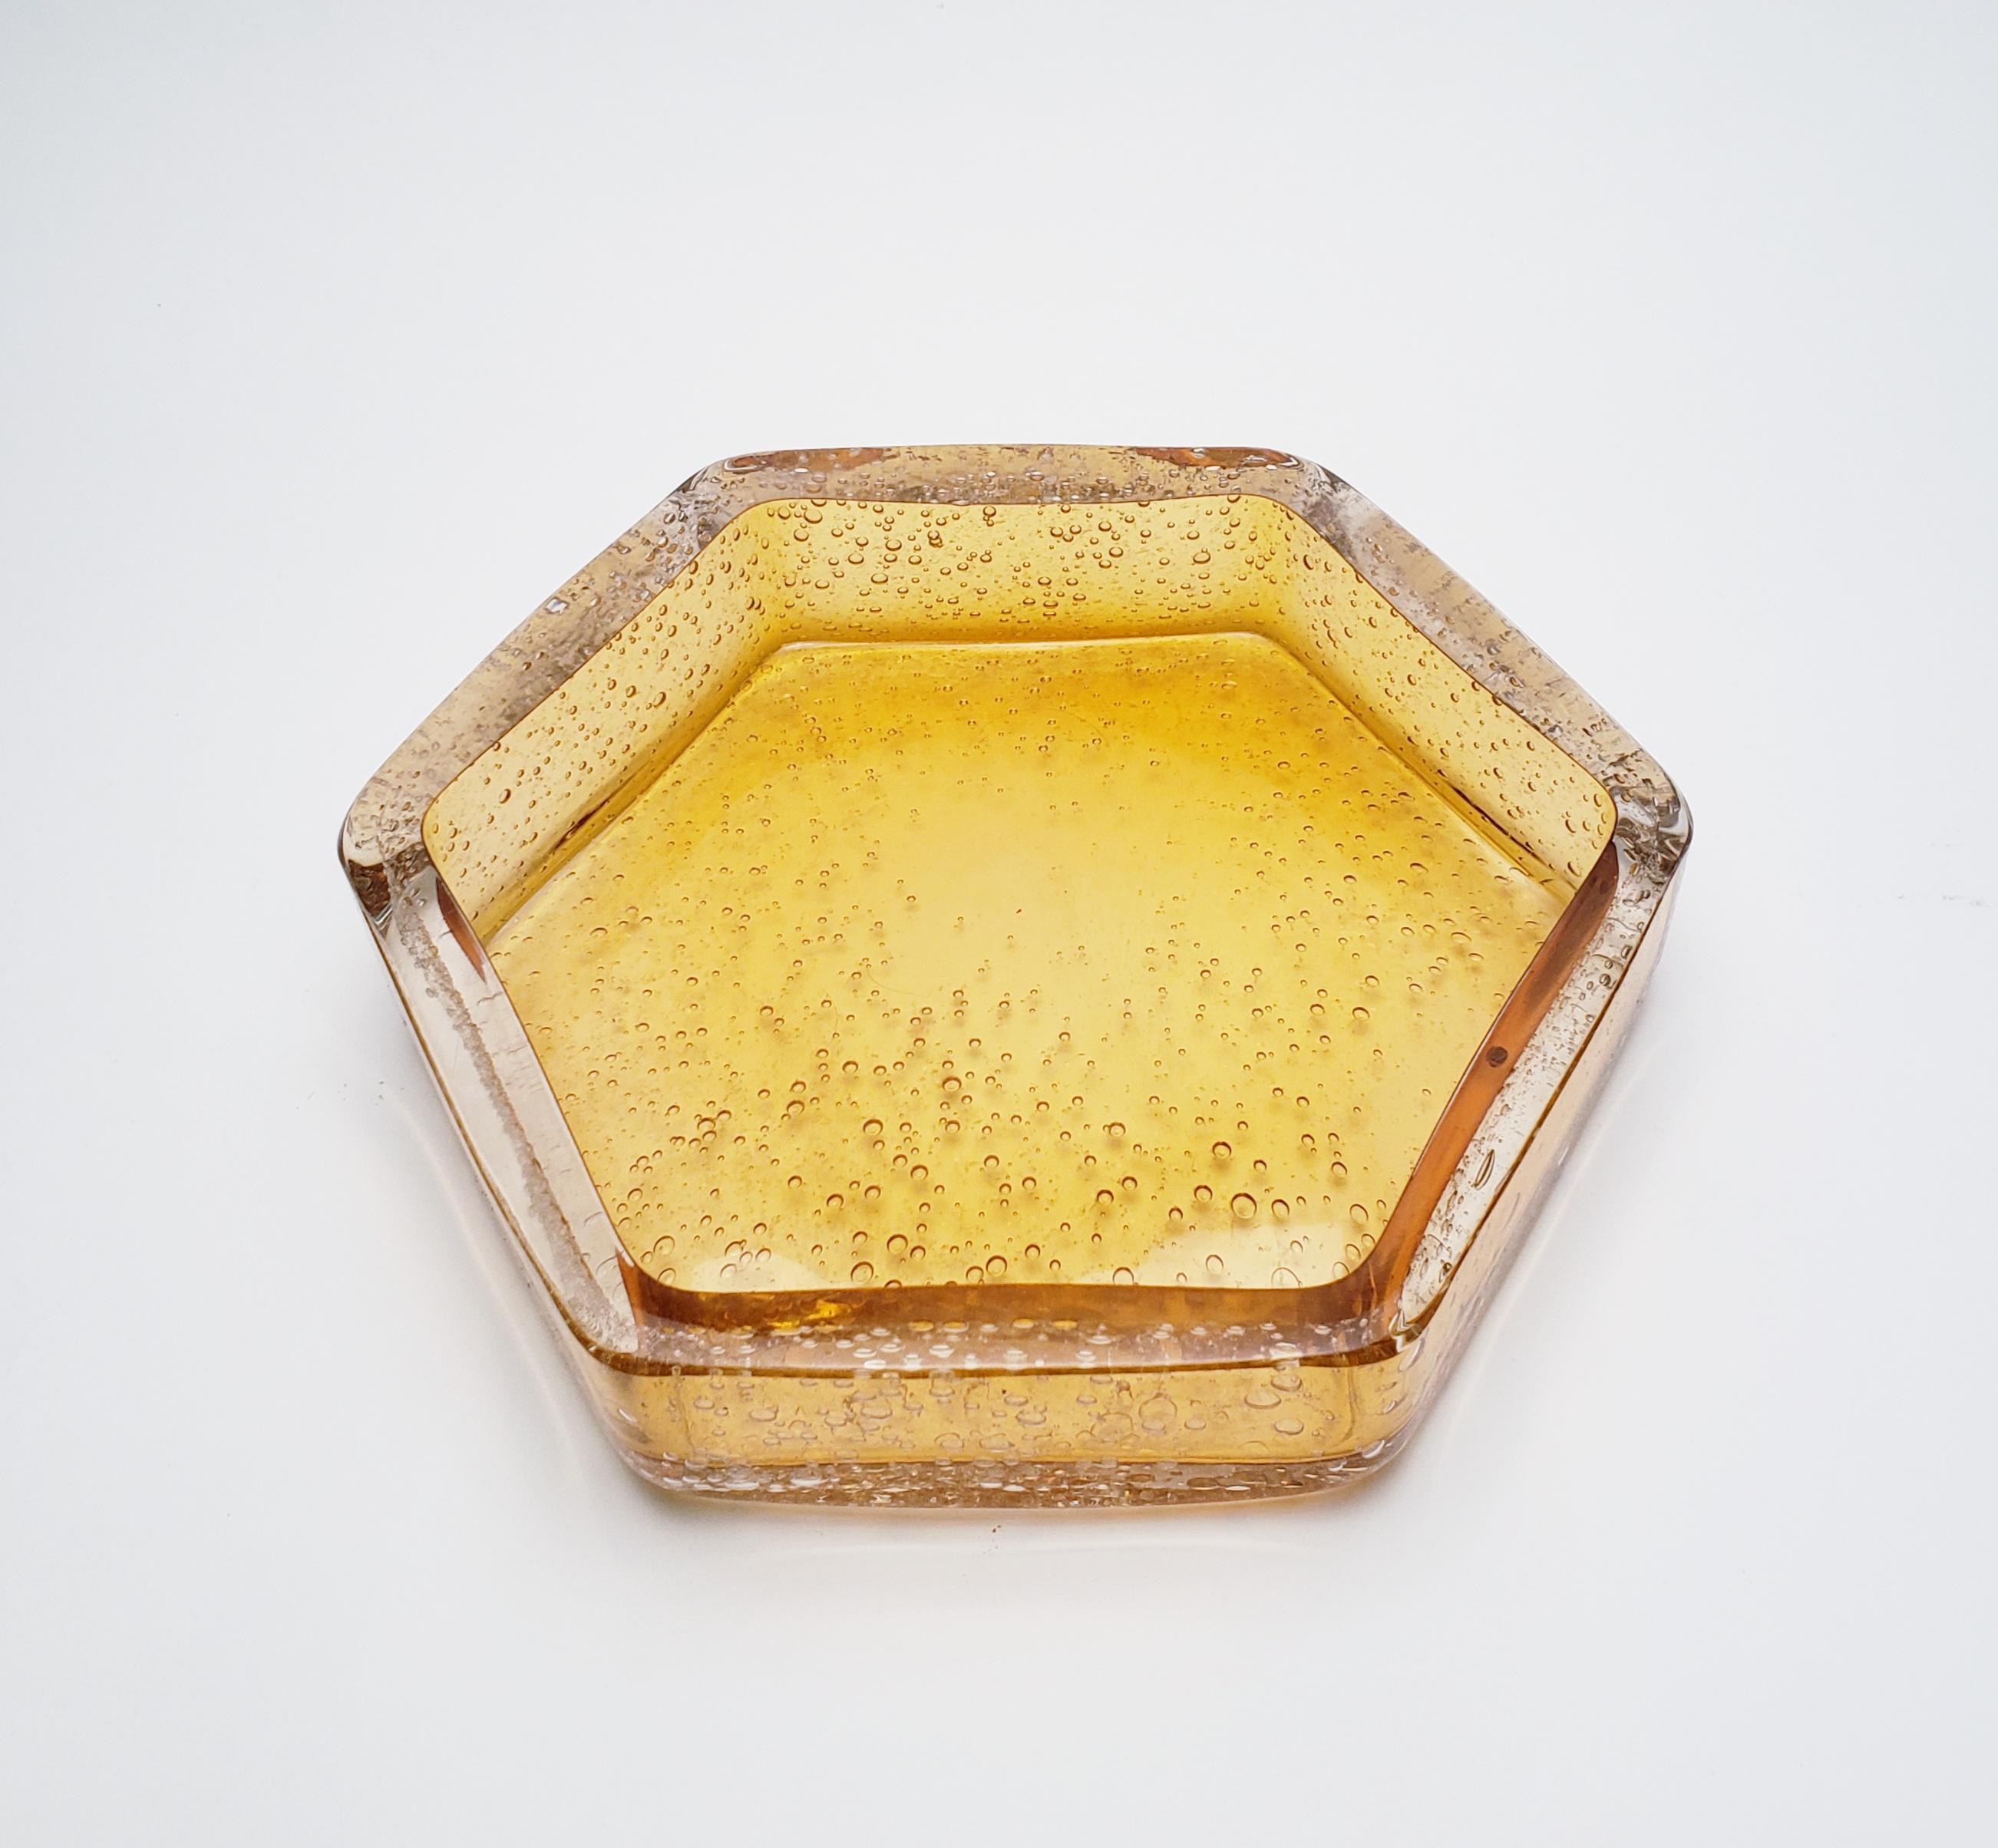 The honeycomb desk set is comprised of four separate organizing containers that create a contemporary look on any desk environment. Made with gold topaz color, the set includes a large catch all (2.5